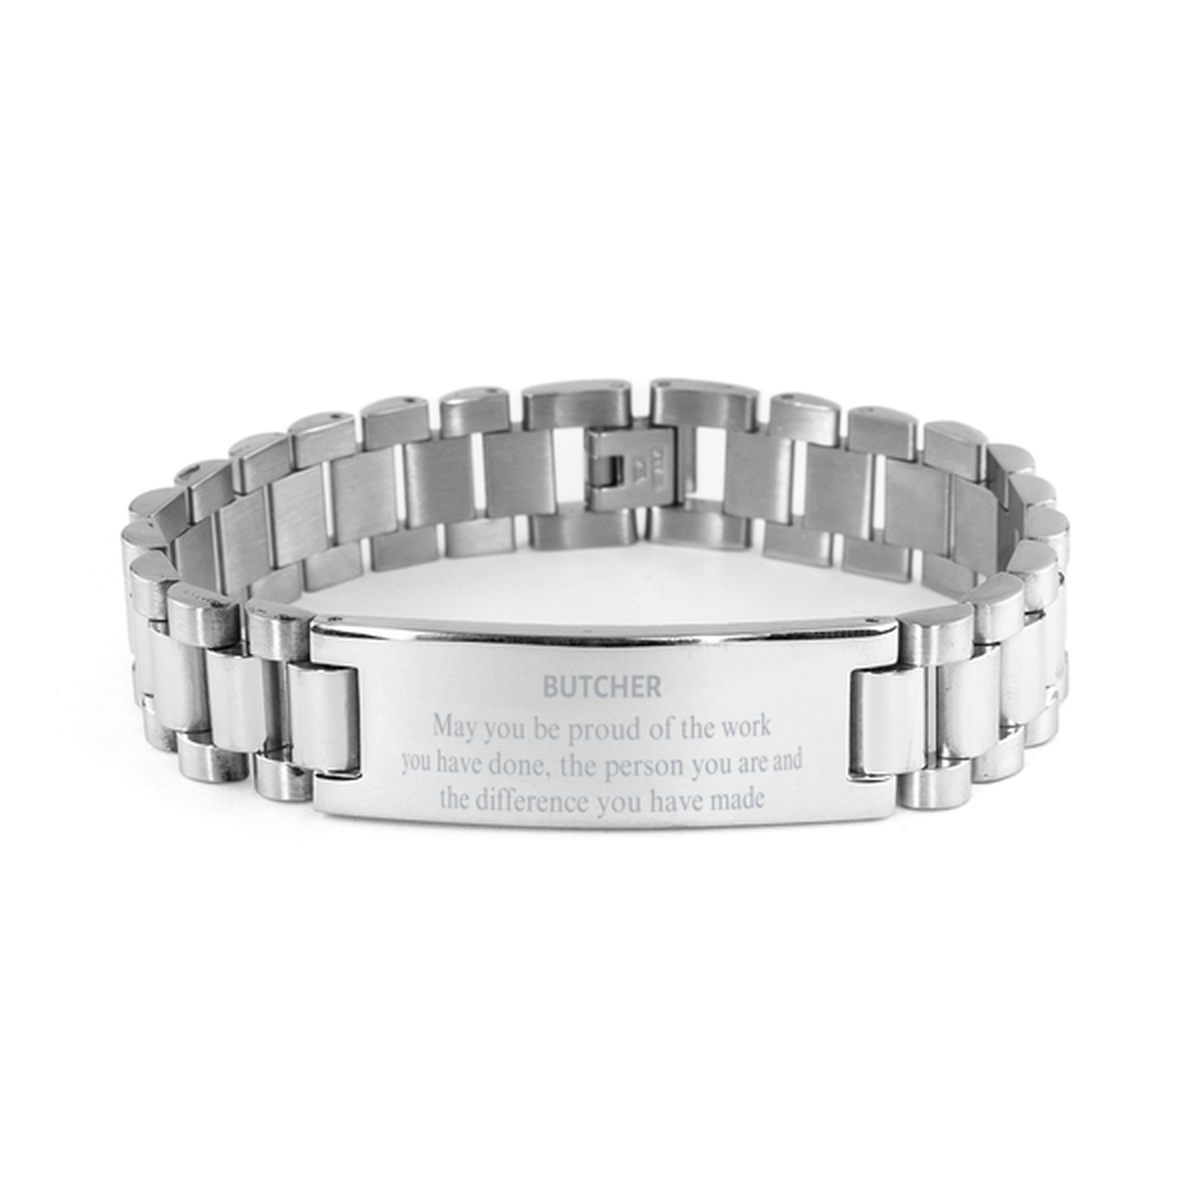 Butcher May you be proud of the work you have done, Retirement Butcher Ladder Stainless Steel Bracelet for Colleague Appreciation Gifts Amazing for Butcher